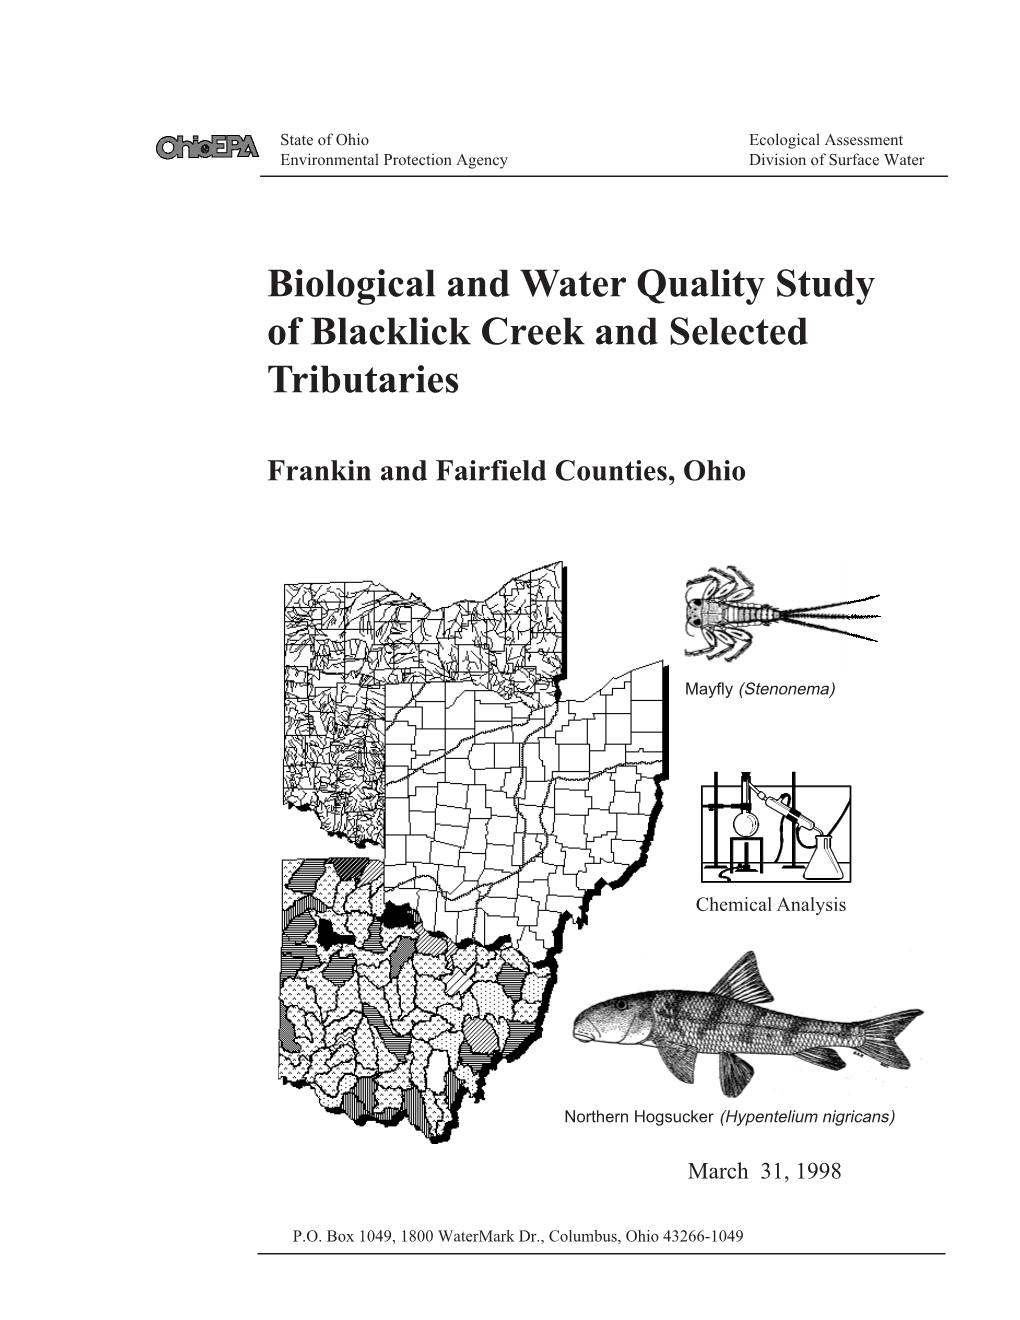 Biological and Water Quality Study of Blacklick Creek and Selected Tributaries